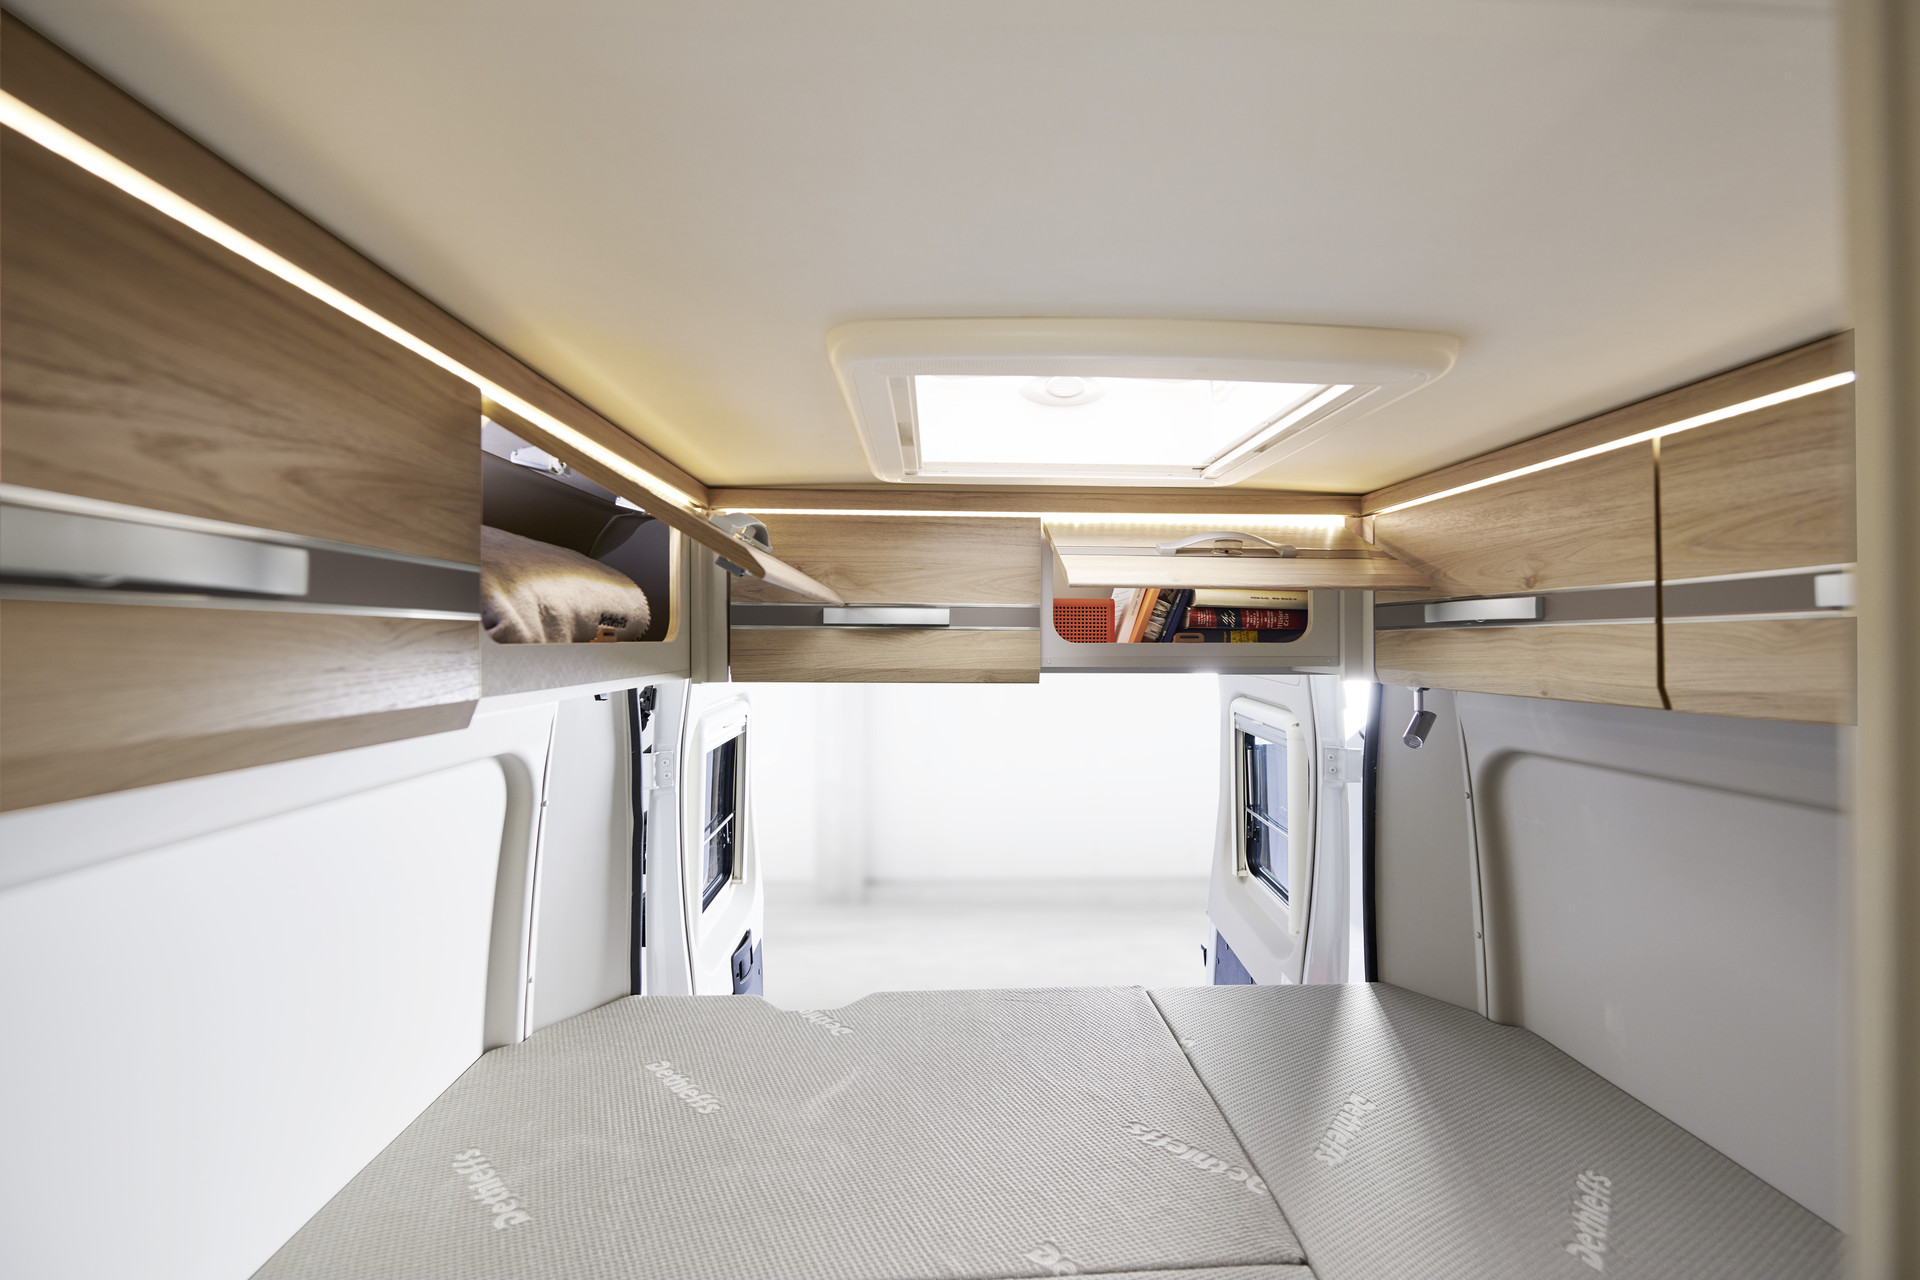 The standard overhead lockers above the rear door provide additional storage space and feature ambient lighting.